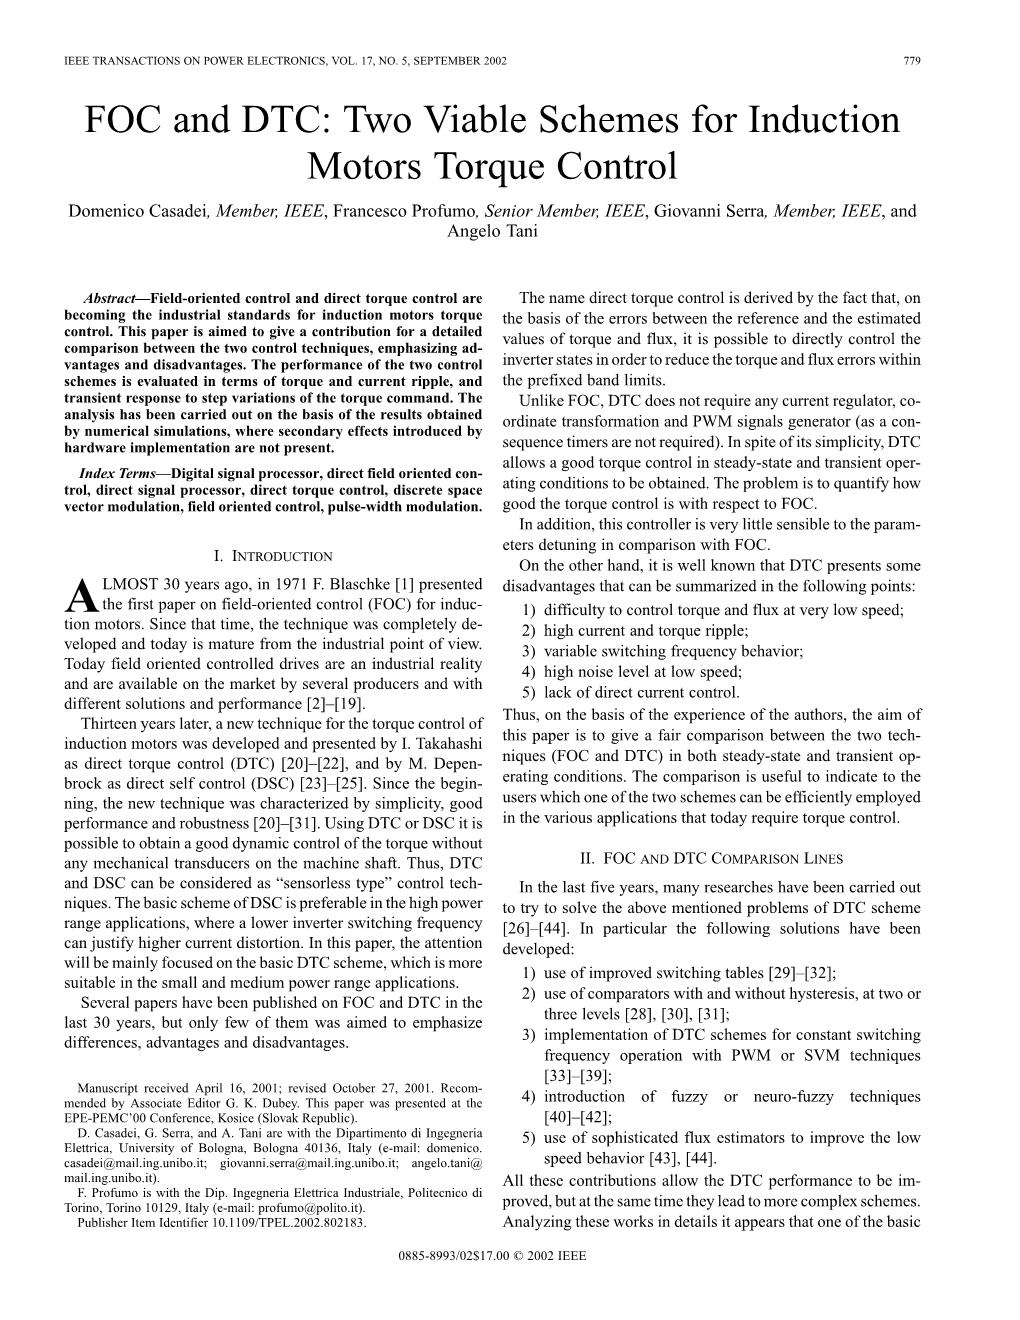 FOC and DTC: Two Viable Schemes for Induction Motors Torque Control